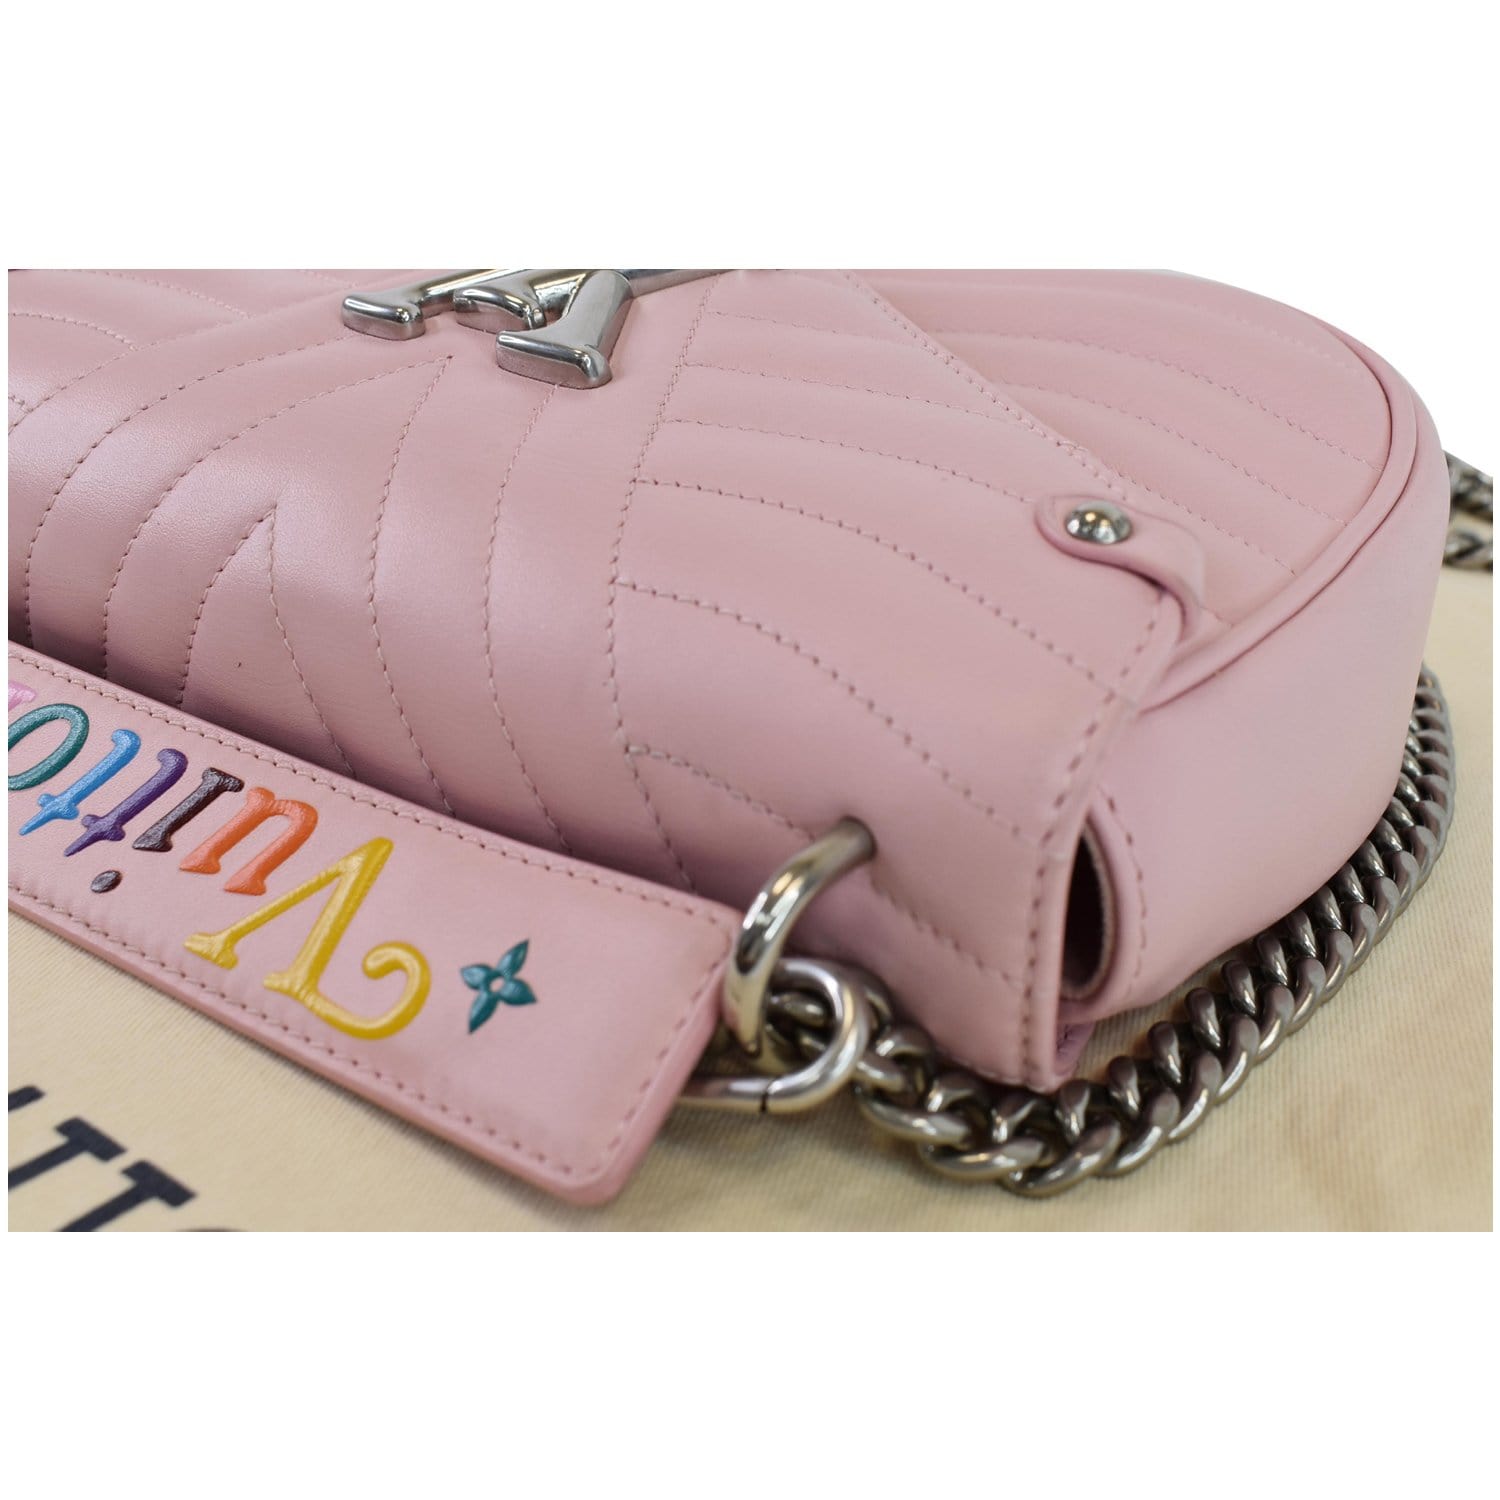 louis vuitton new wave chain bag pink